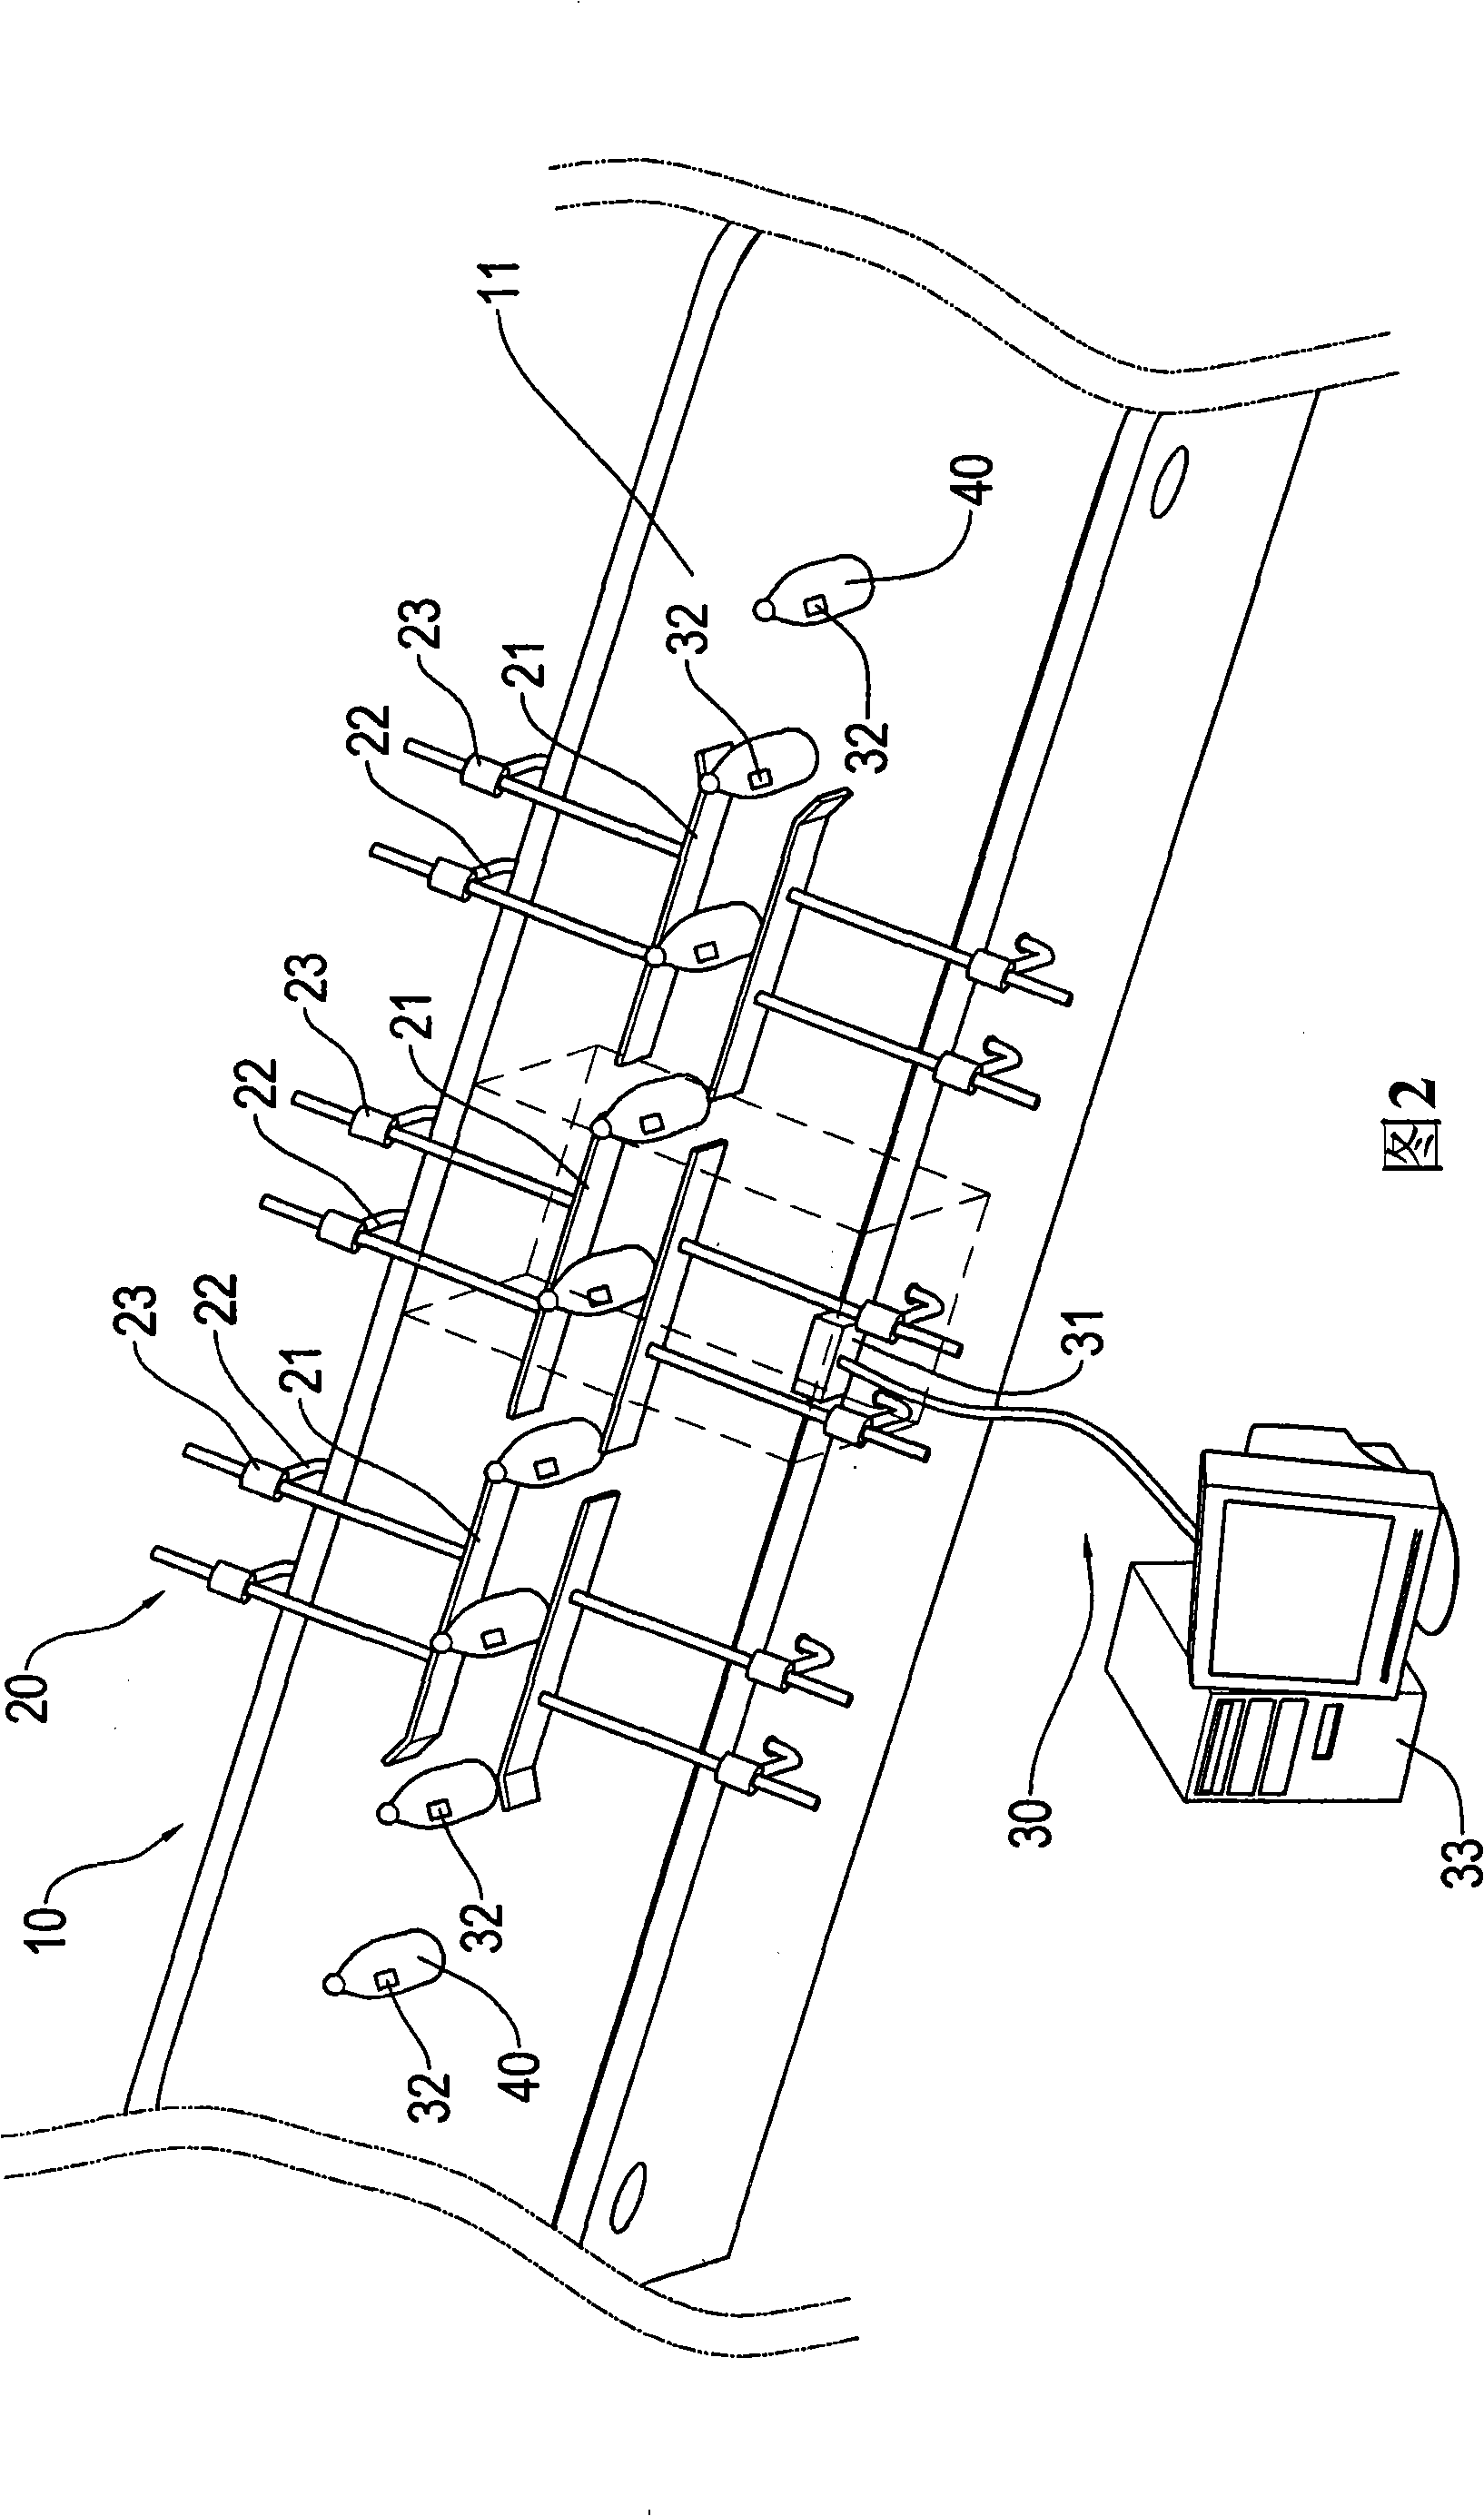 Testing device of electronic label and its method